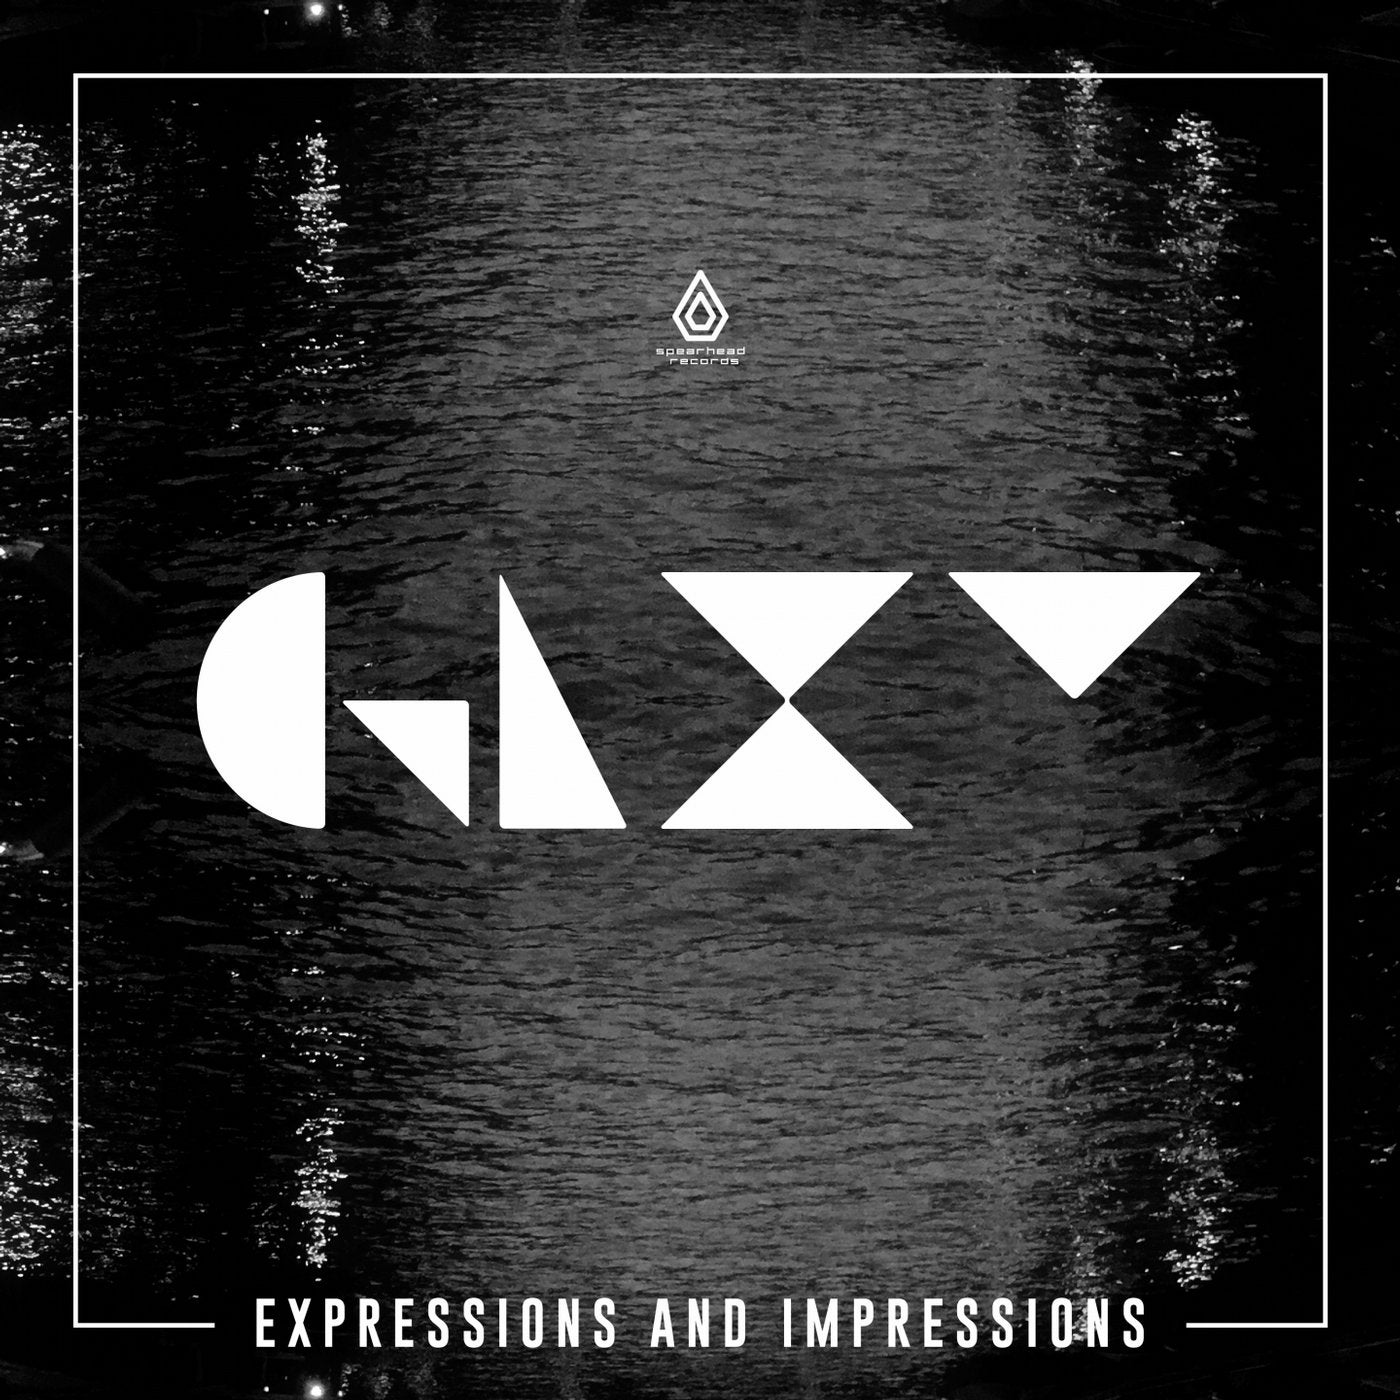 Expressions & Impressions EP